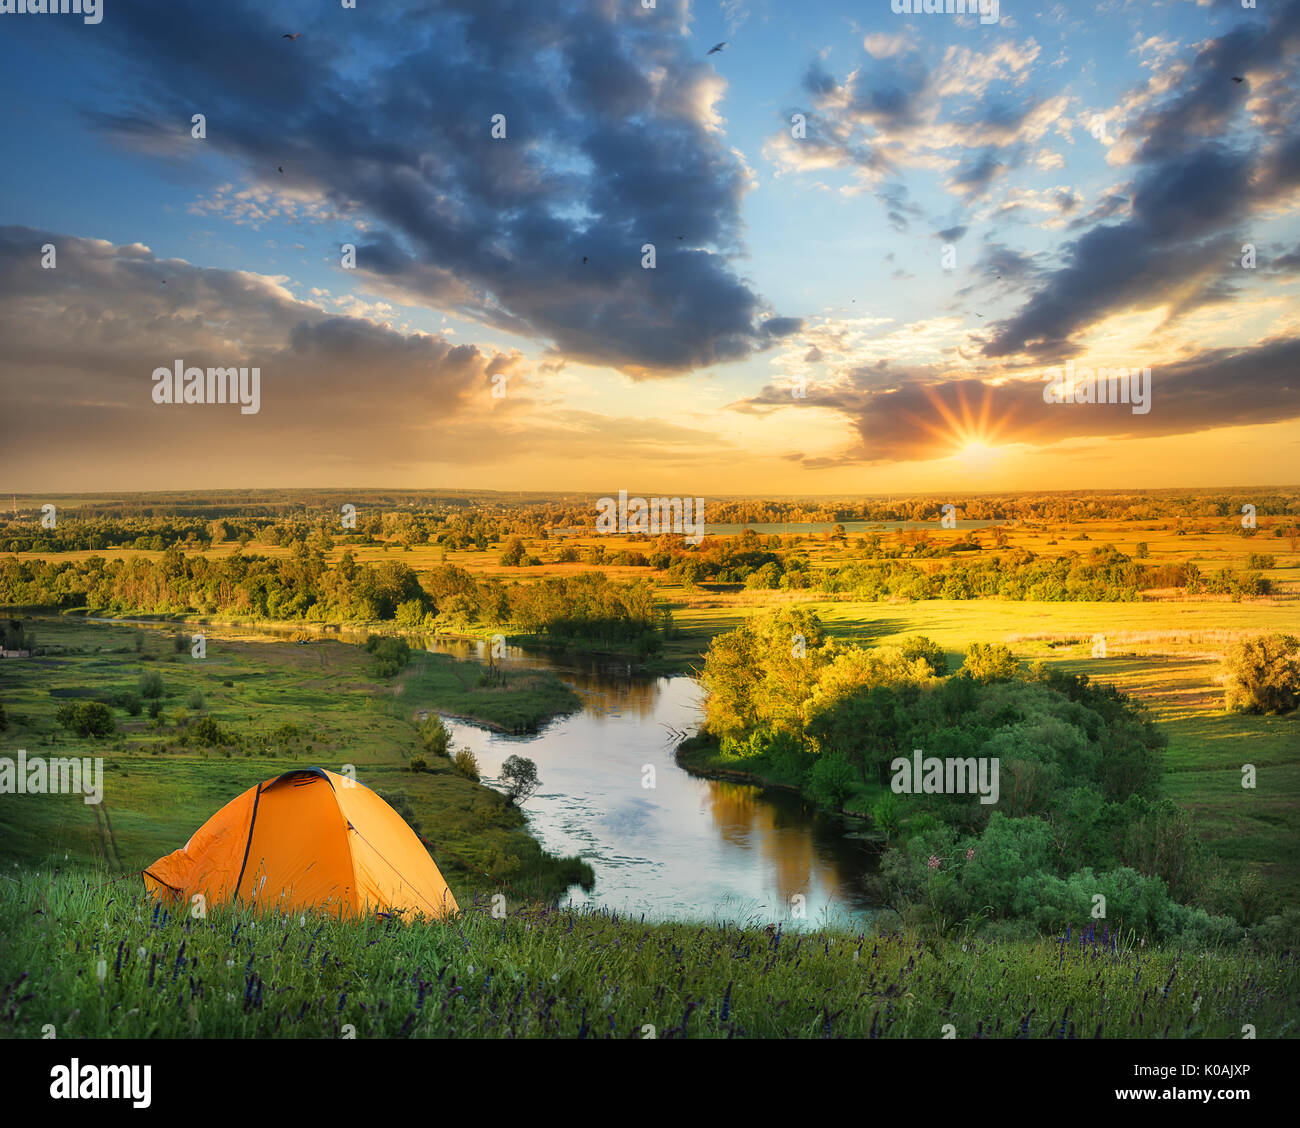 River under a hill with an orange tent at sunset Stock Photo